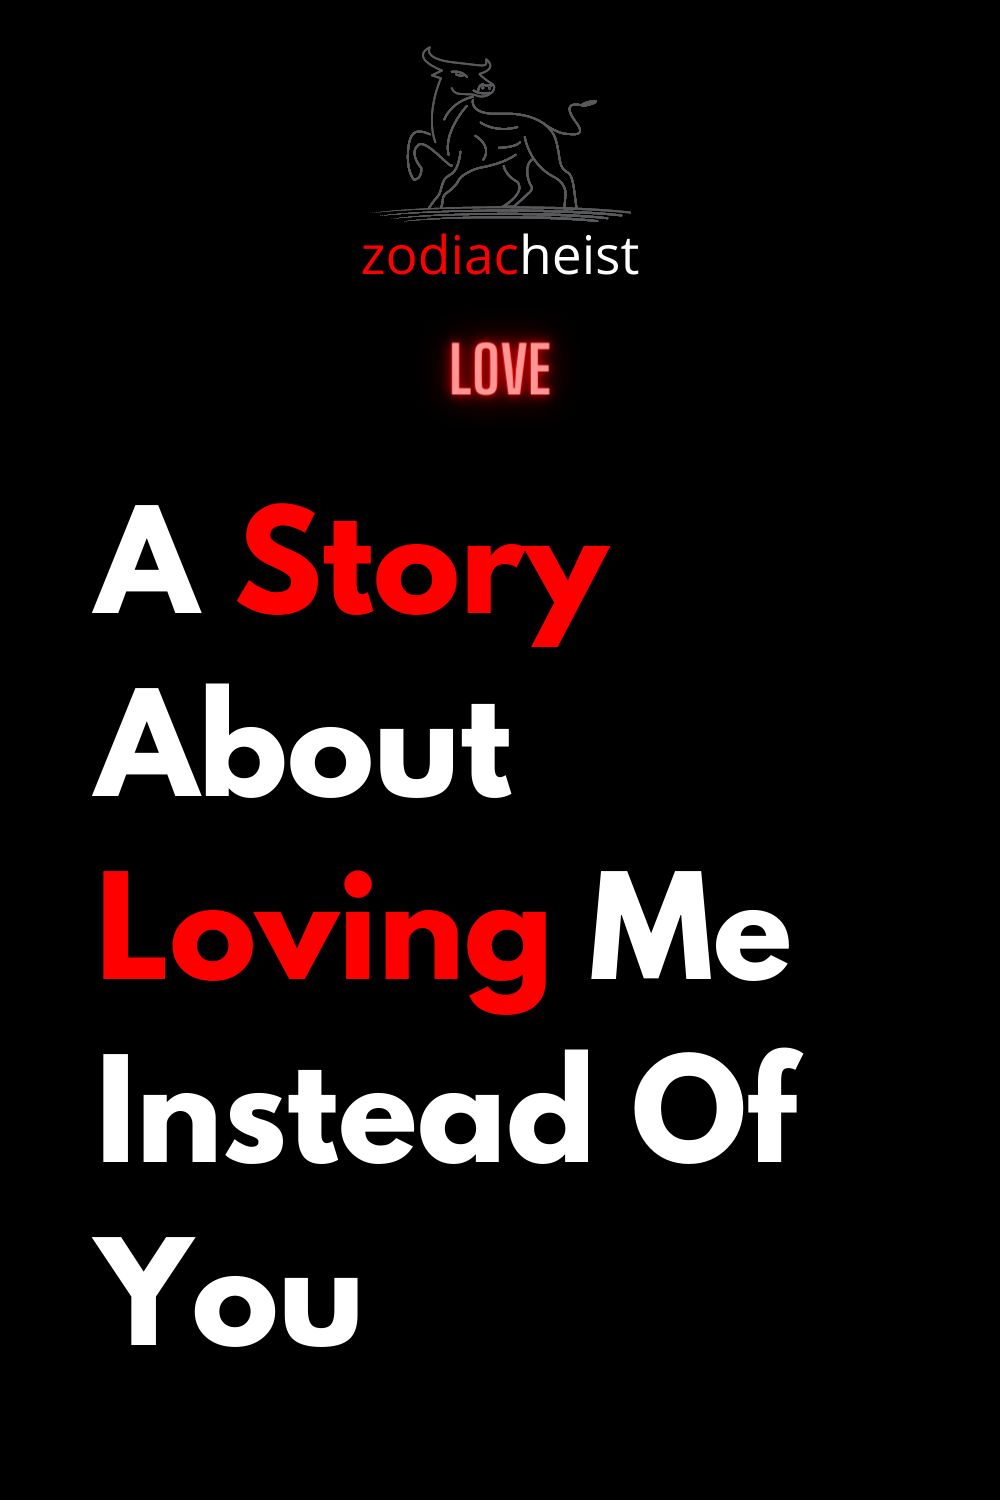 A Story About Loving Me Instead Of You